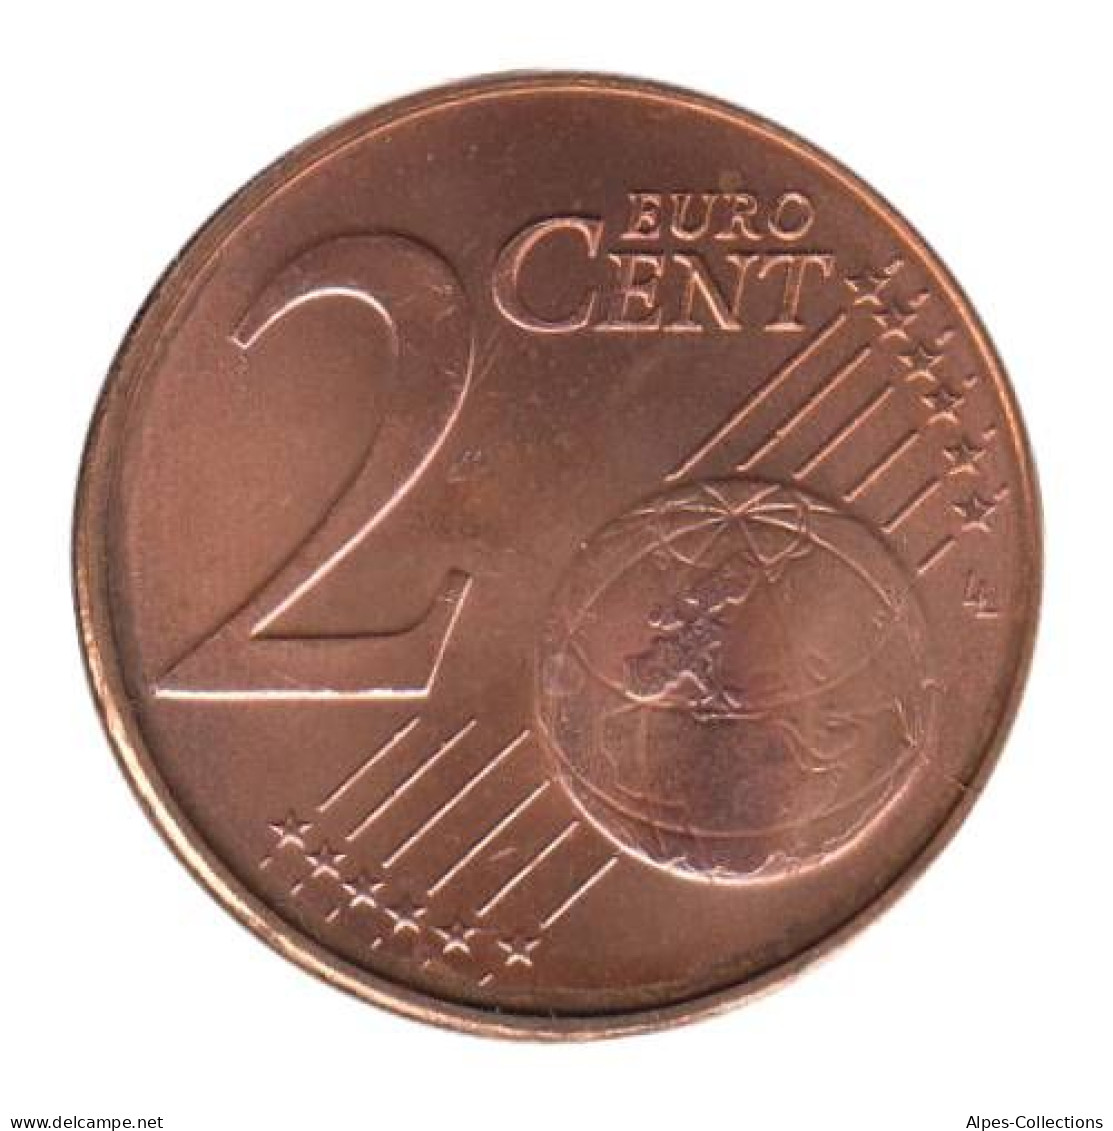 LU00202.1 - LUXEMBOURG - 2 Cents - 2002 - Luxembourg